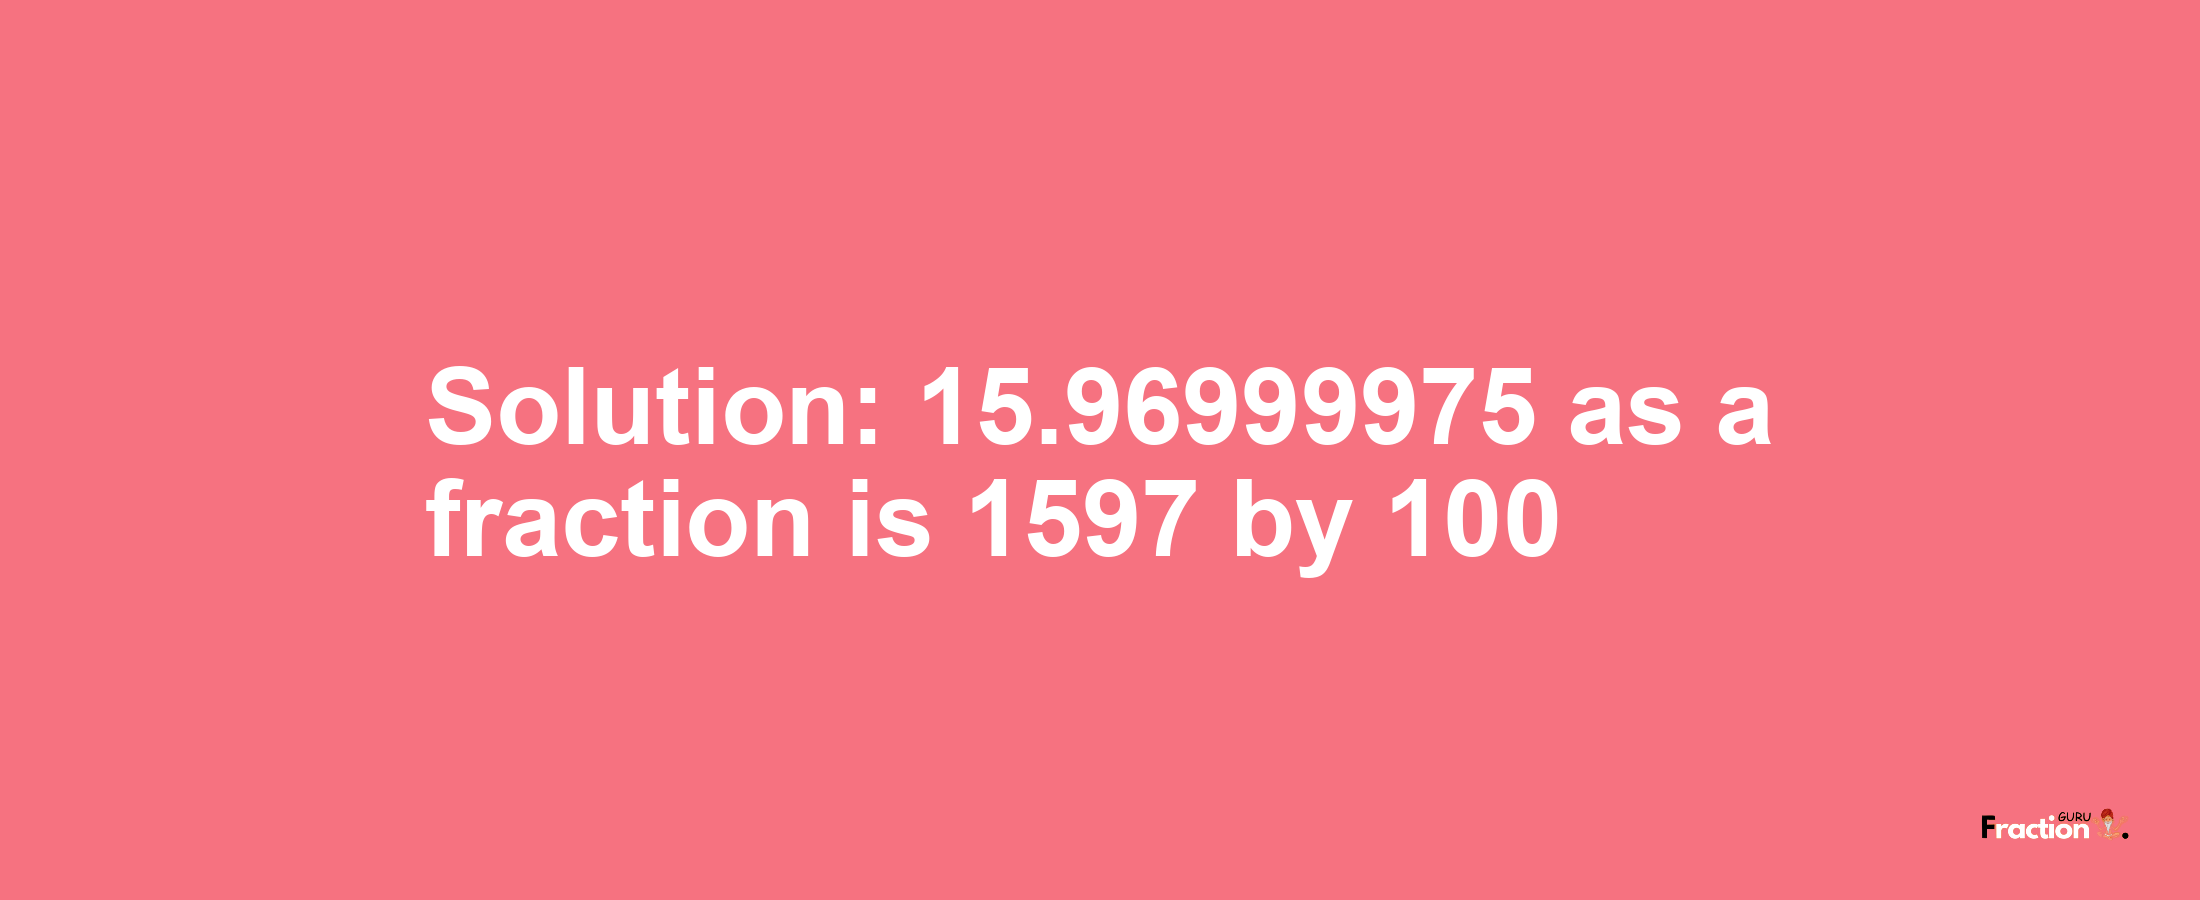 Solution:15.96999975 as a fraction is 1597/100